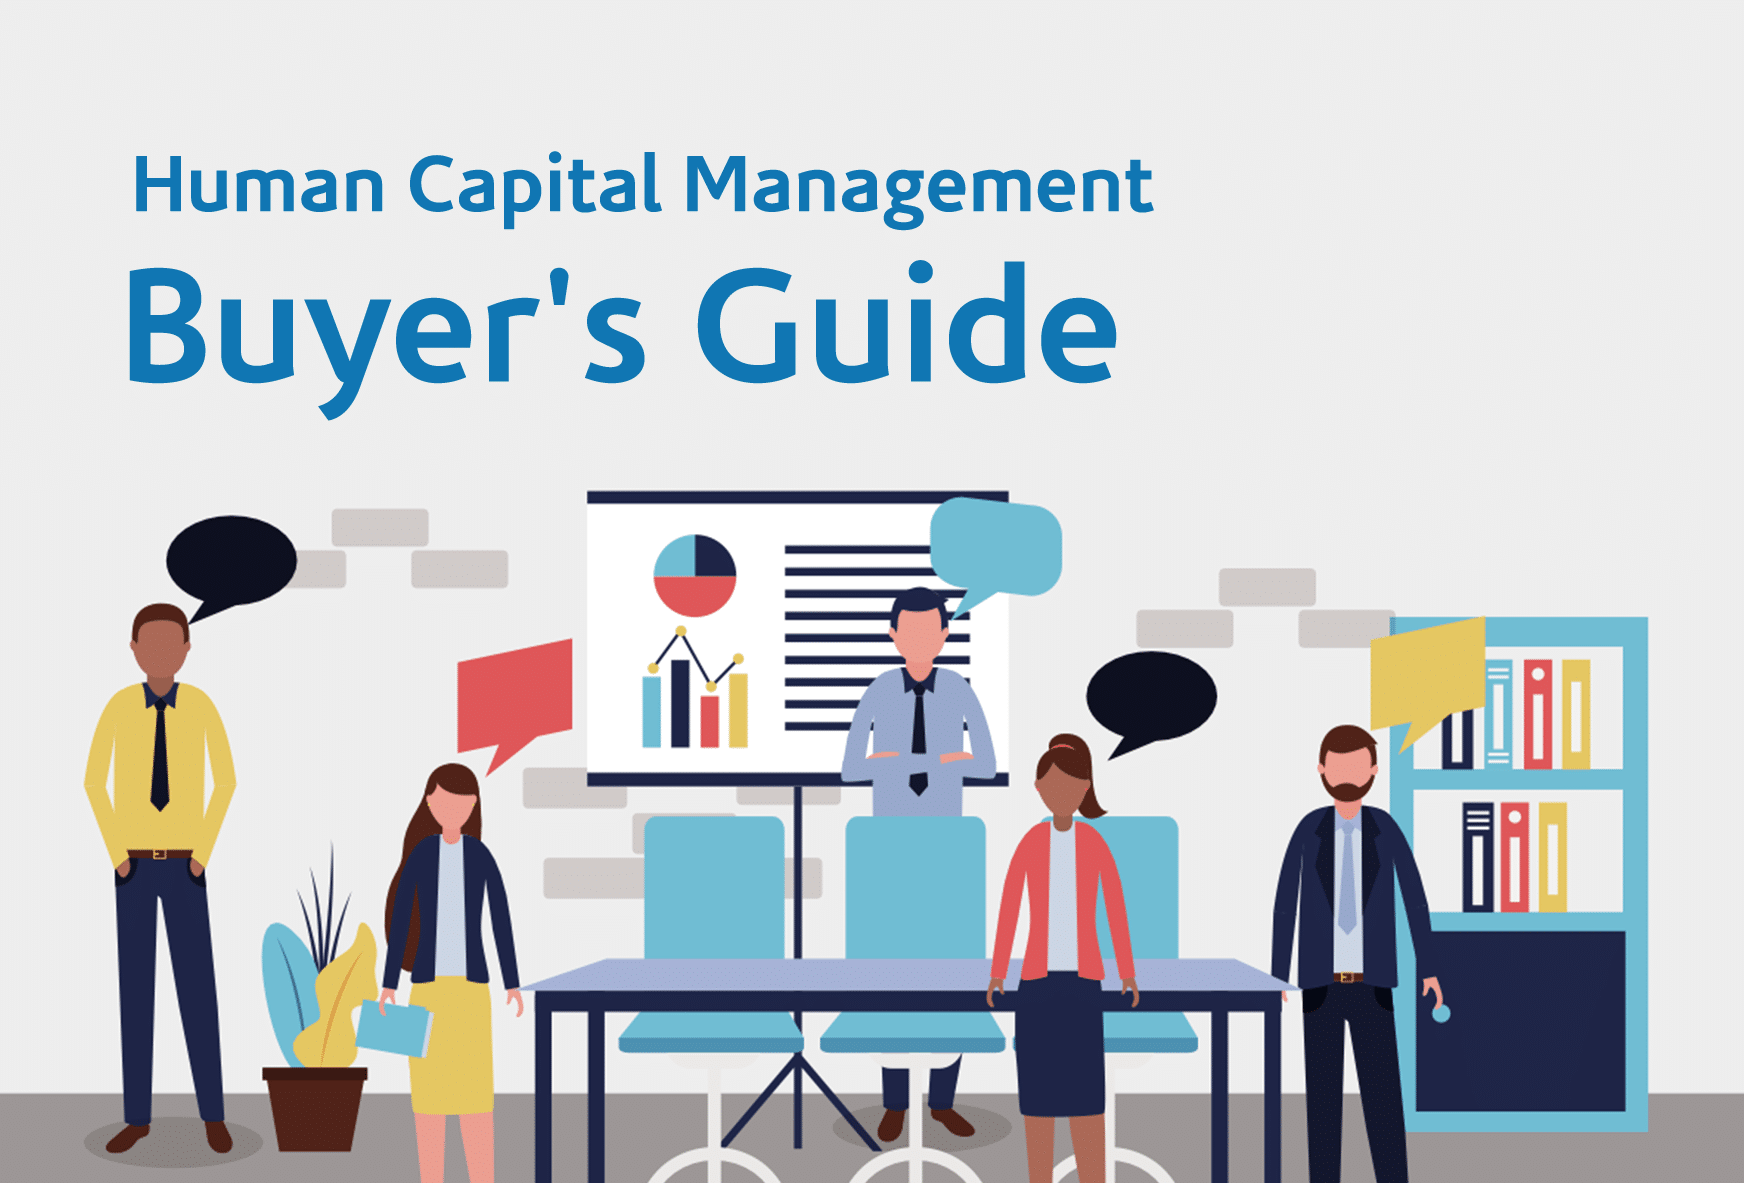 To recruit, manage, pay, and retain top-performing employees in this highly competitive landscape, effective human capital management (HCM) technology is crucial.